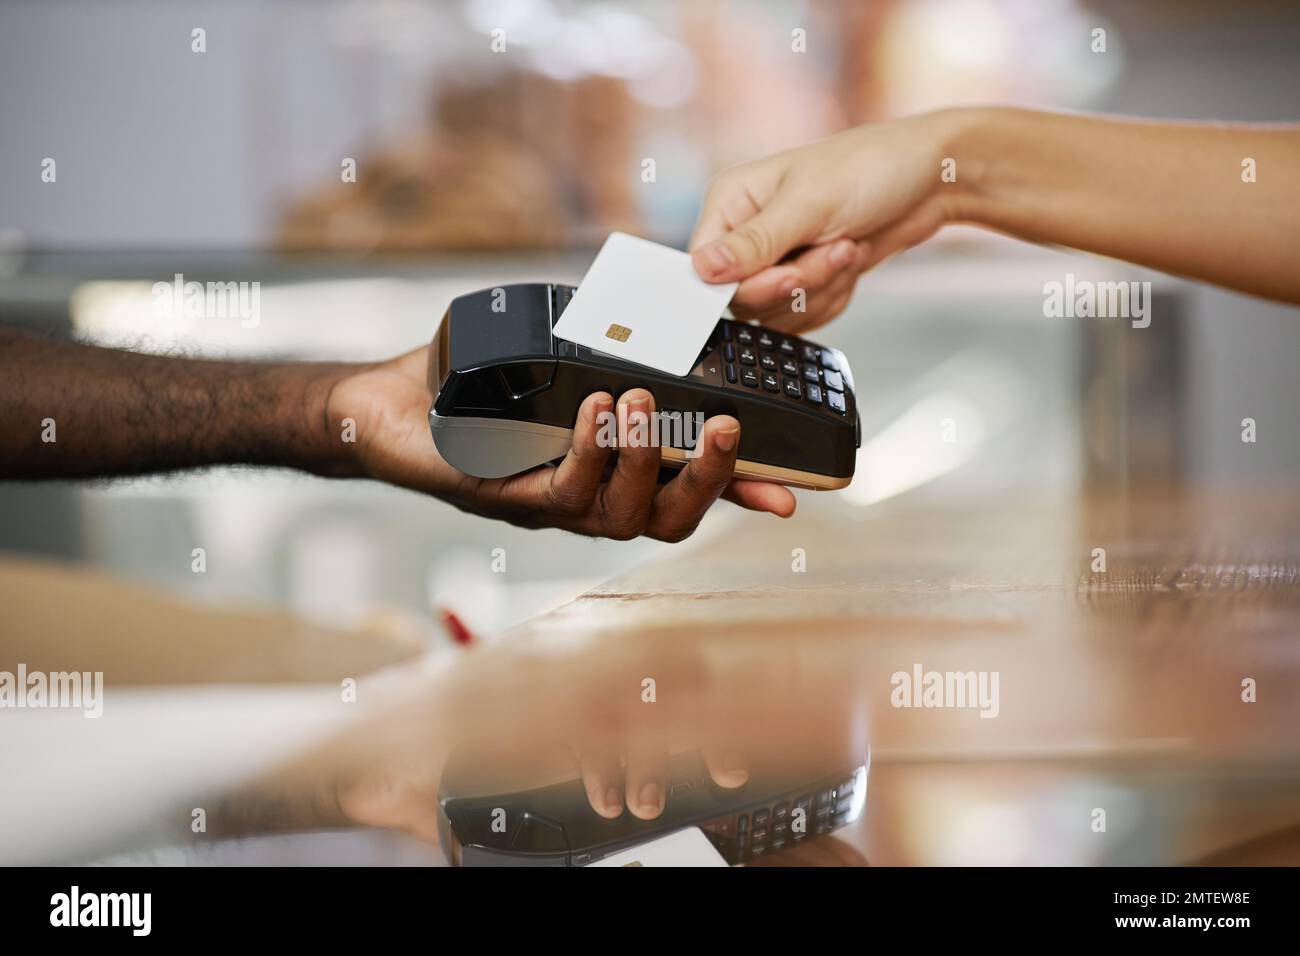 Closeup image of cashier desk worker accepting payment from customer Stock Photo